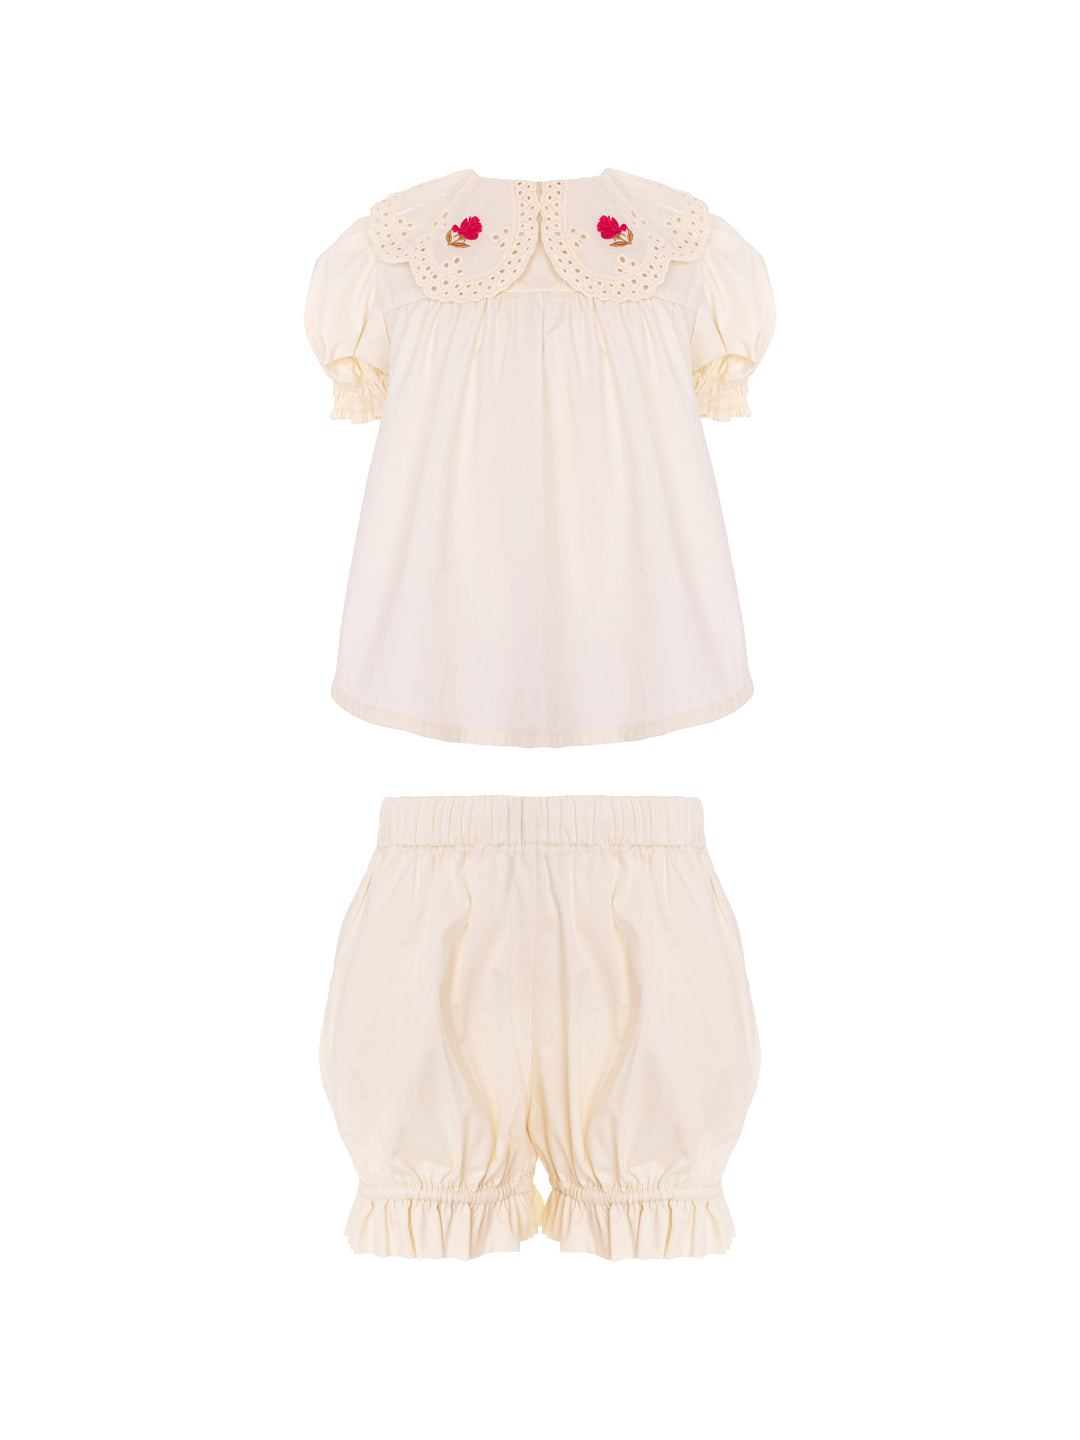 ROSE BABY SET-BEIGE COTTON WITH ROSE EMBROIDERED COLLAR